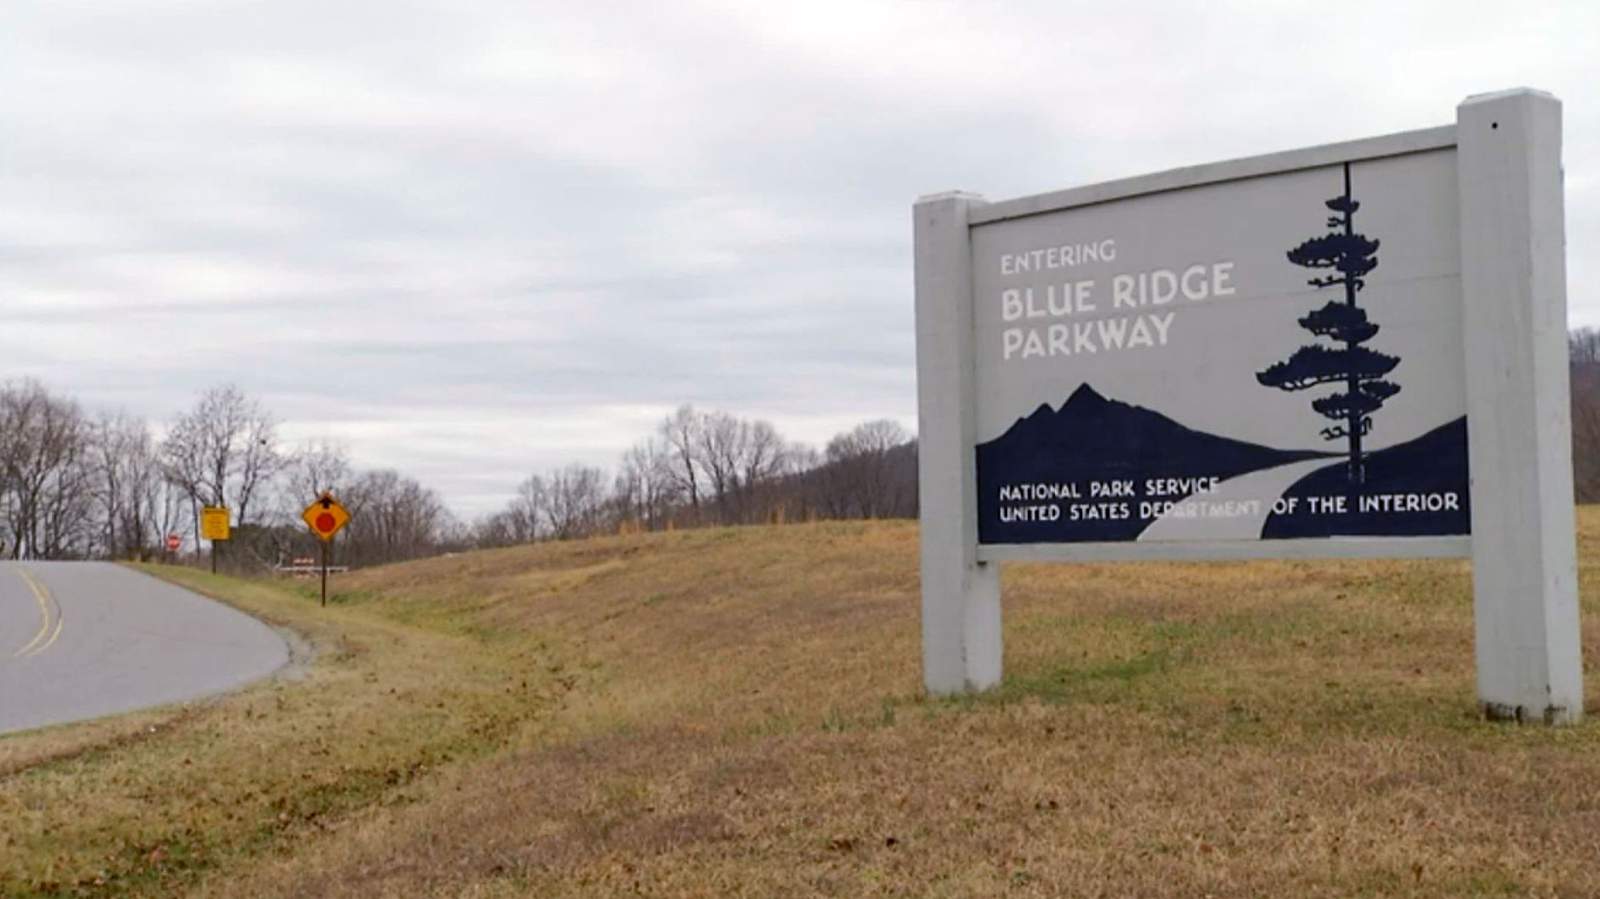 Part of Blue Ridge Parkway closed to help slow the spread of the coronavirus announced